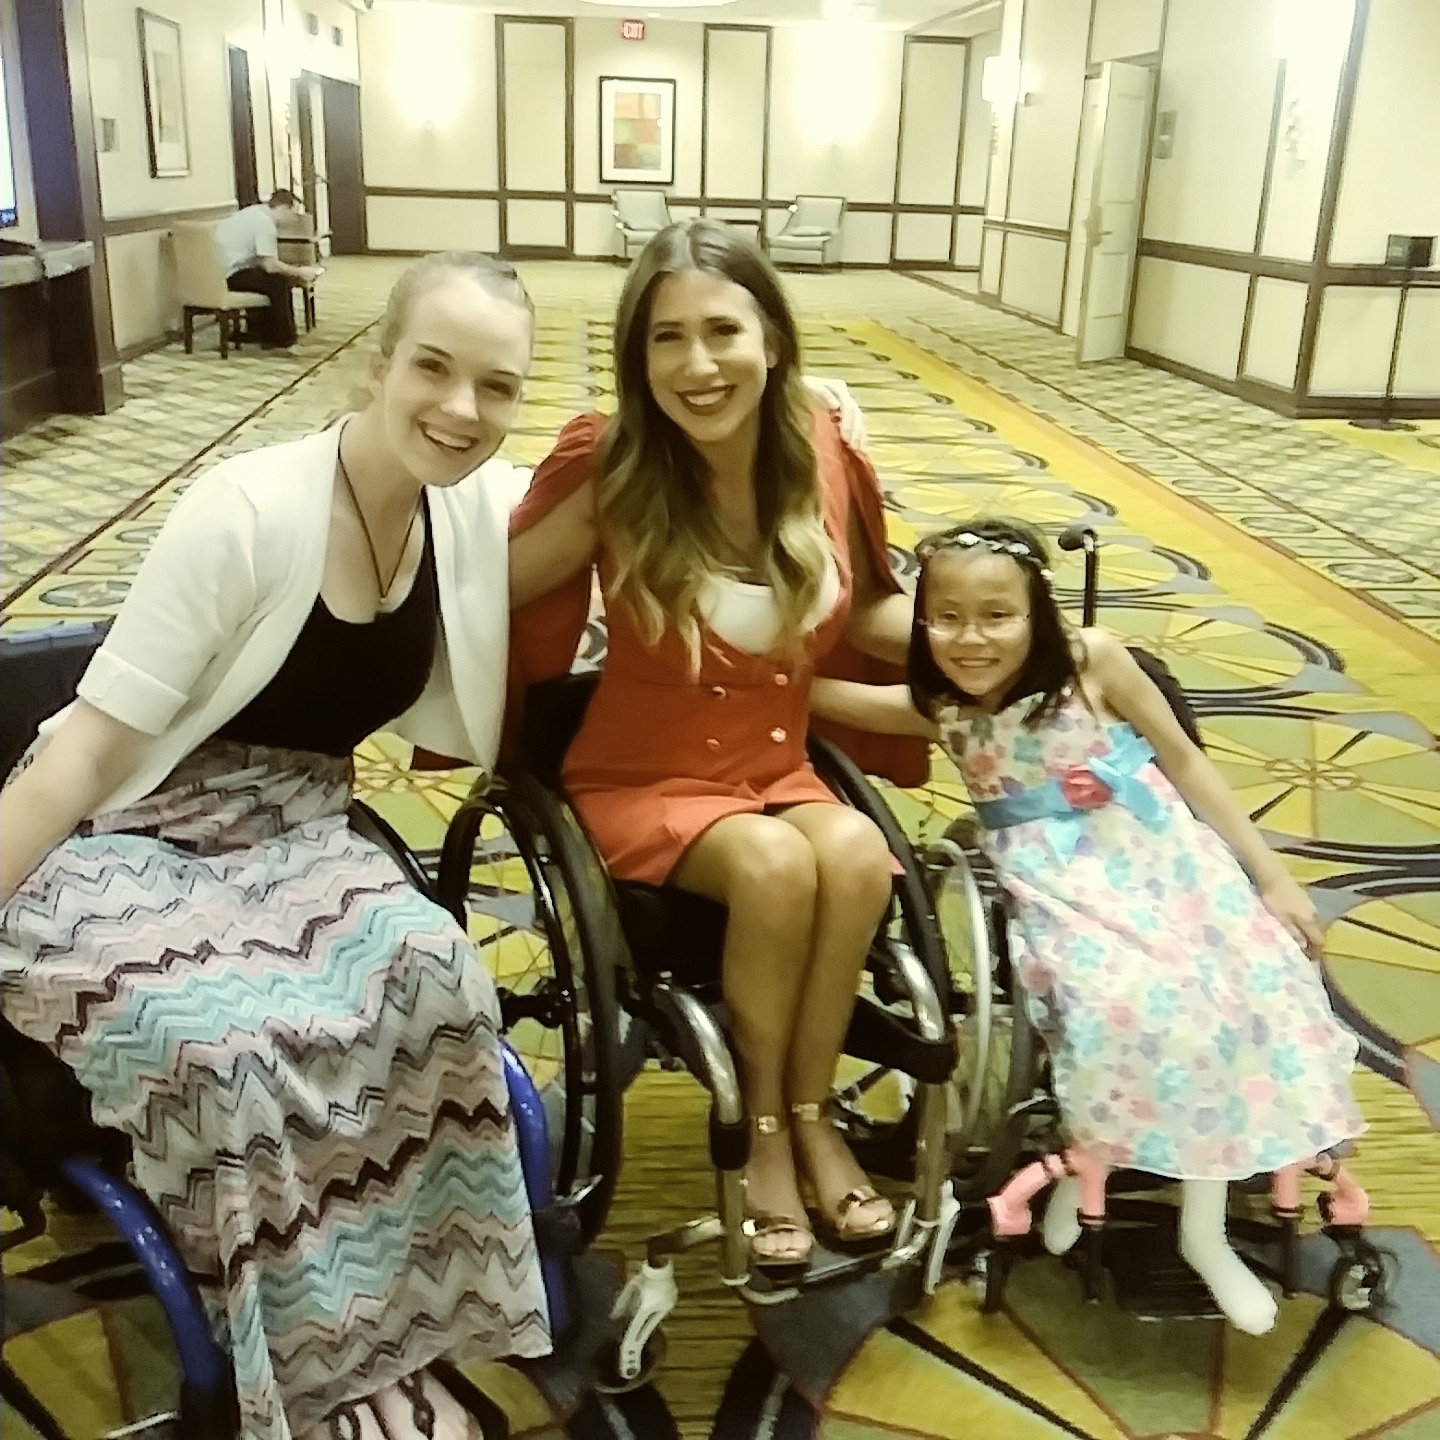 The Downer ladies enjoyed meeting and learning wheelchair dance skills from Rollettes founder Chelsie Hill.